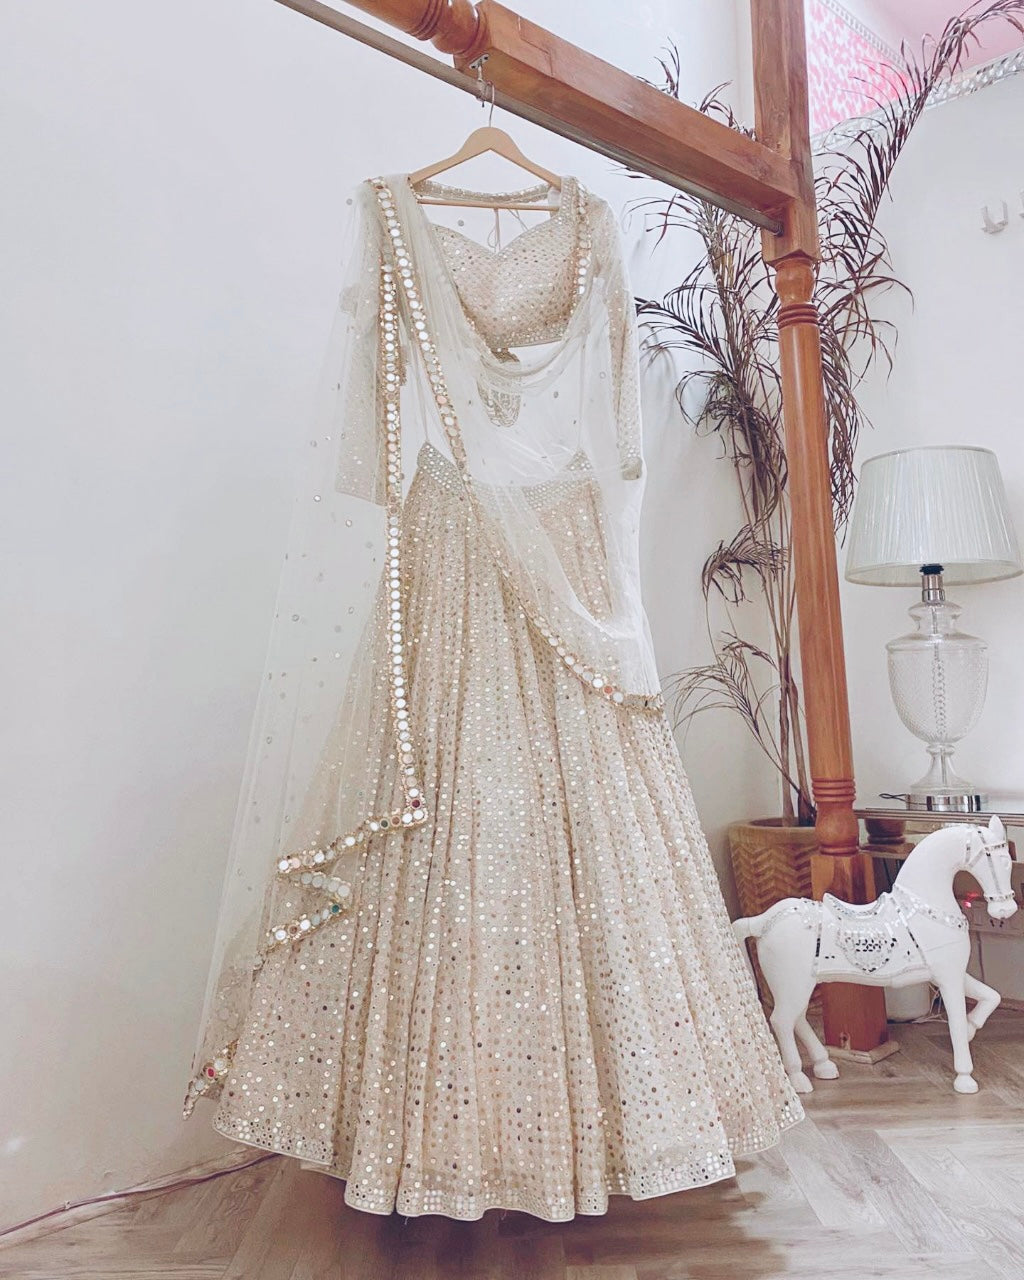 Shop For Christian Wedding Gowns For White Wedding |LBB Pune